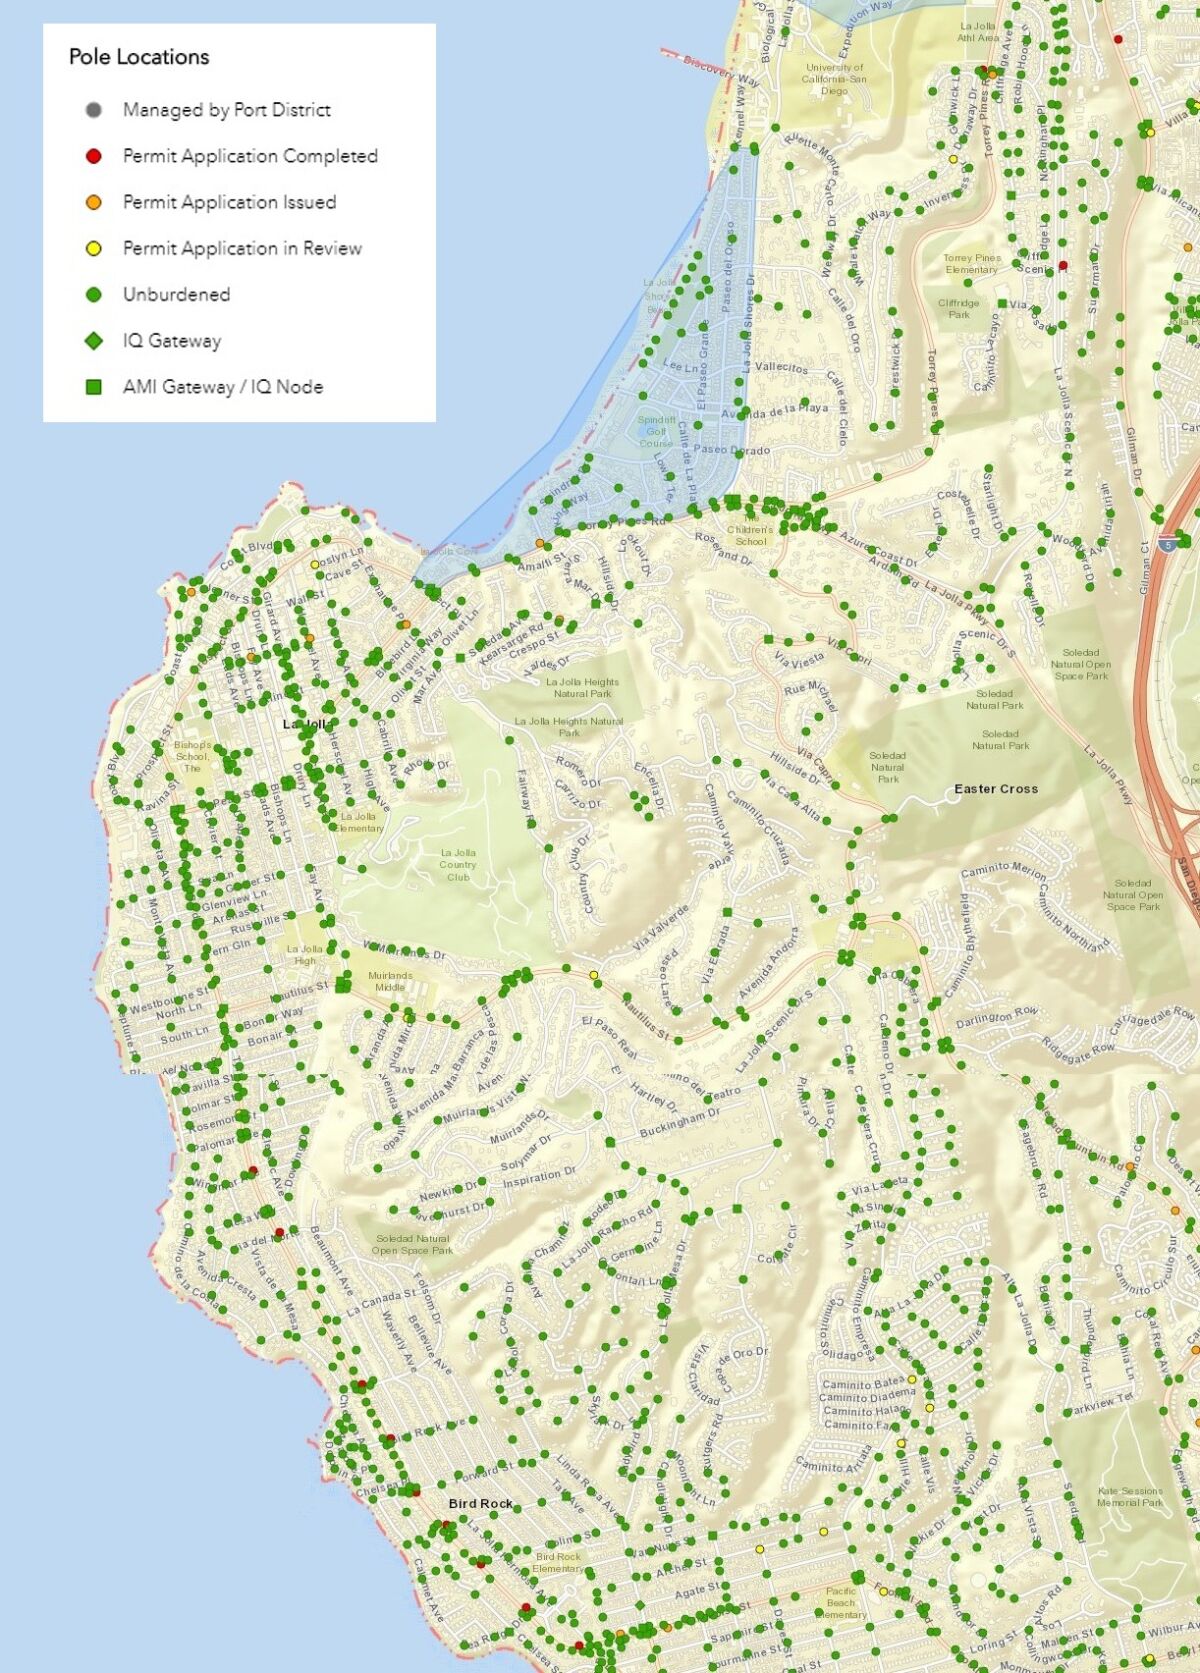 This map shows the 5G miniature cell tower installations approved by the City around La Jolla. AMIs are advanced metering infrastructure, mounted on water meters, used to send data to a gateway that routes it to the City. IQ nodes are image quality multi-sensors installed on light poles.